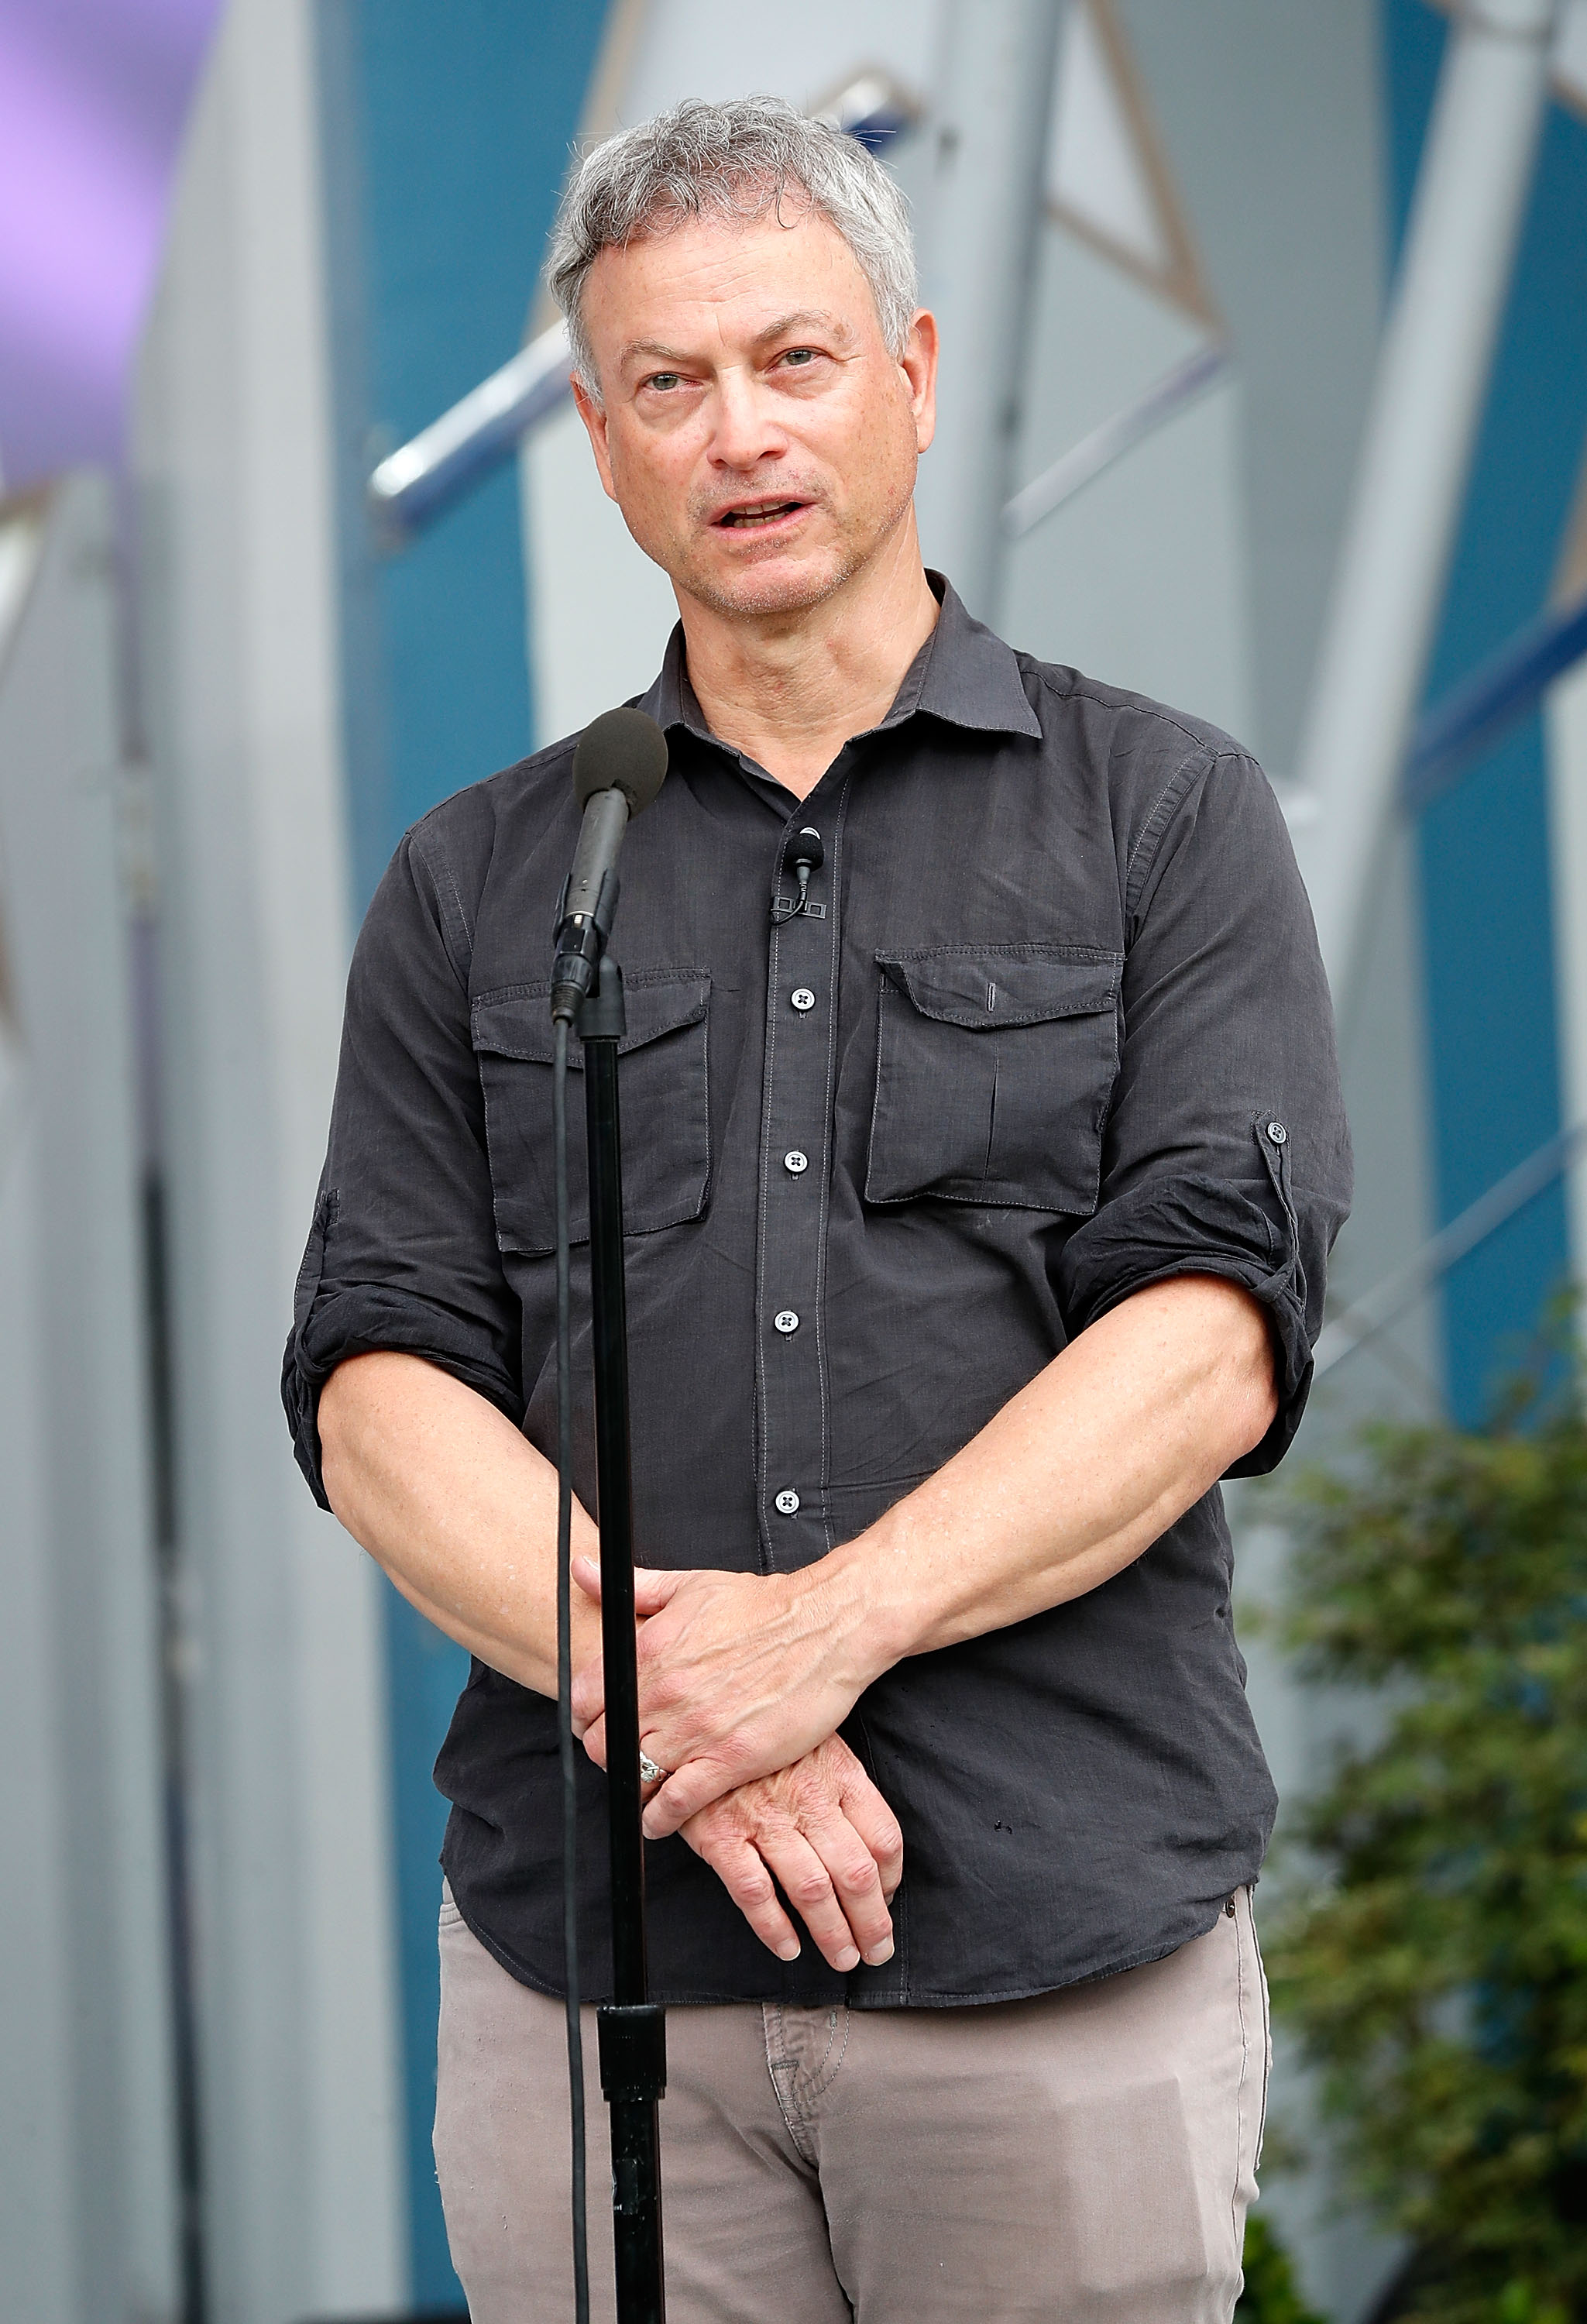 Gary Sinise speaks during the National Memorial Day Concert - Rehearsals at U.S. Capitol, West Lawn, in Washington, DC, on May 26, 2018. | Source: Getty Images